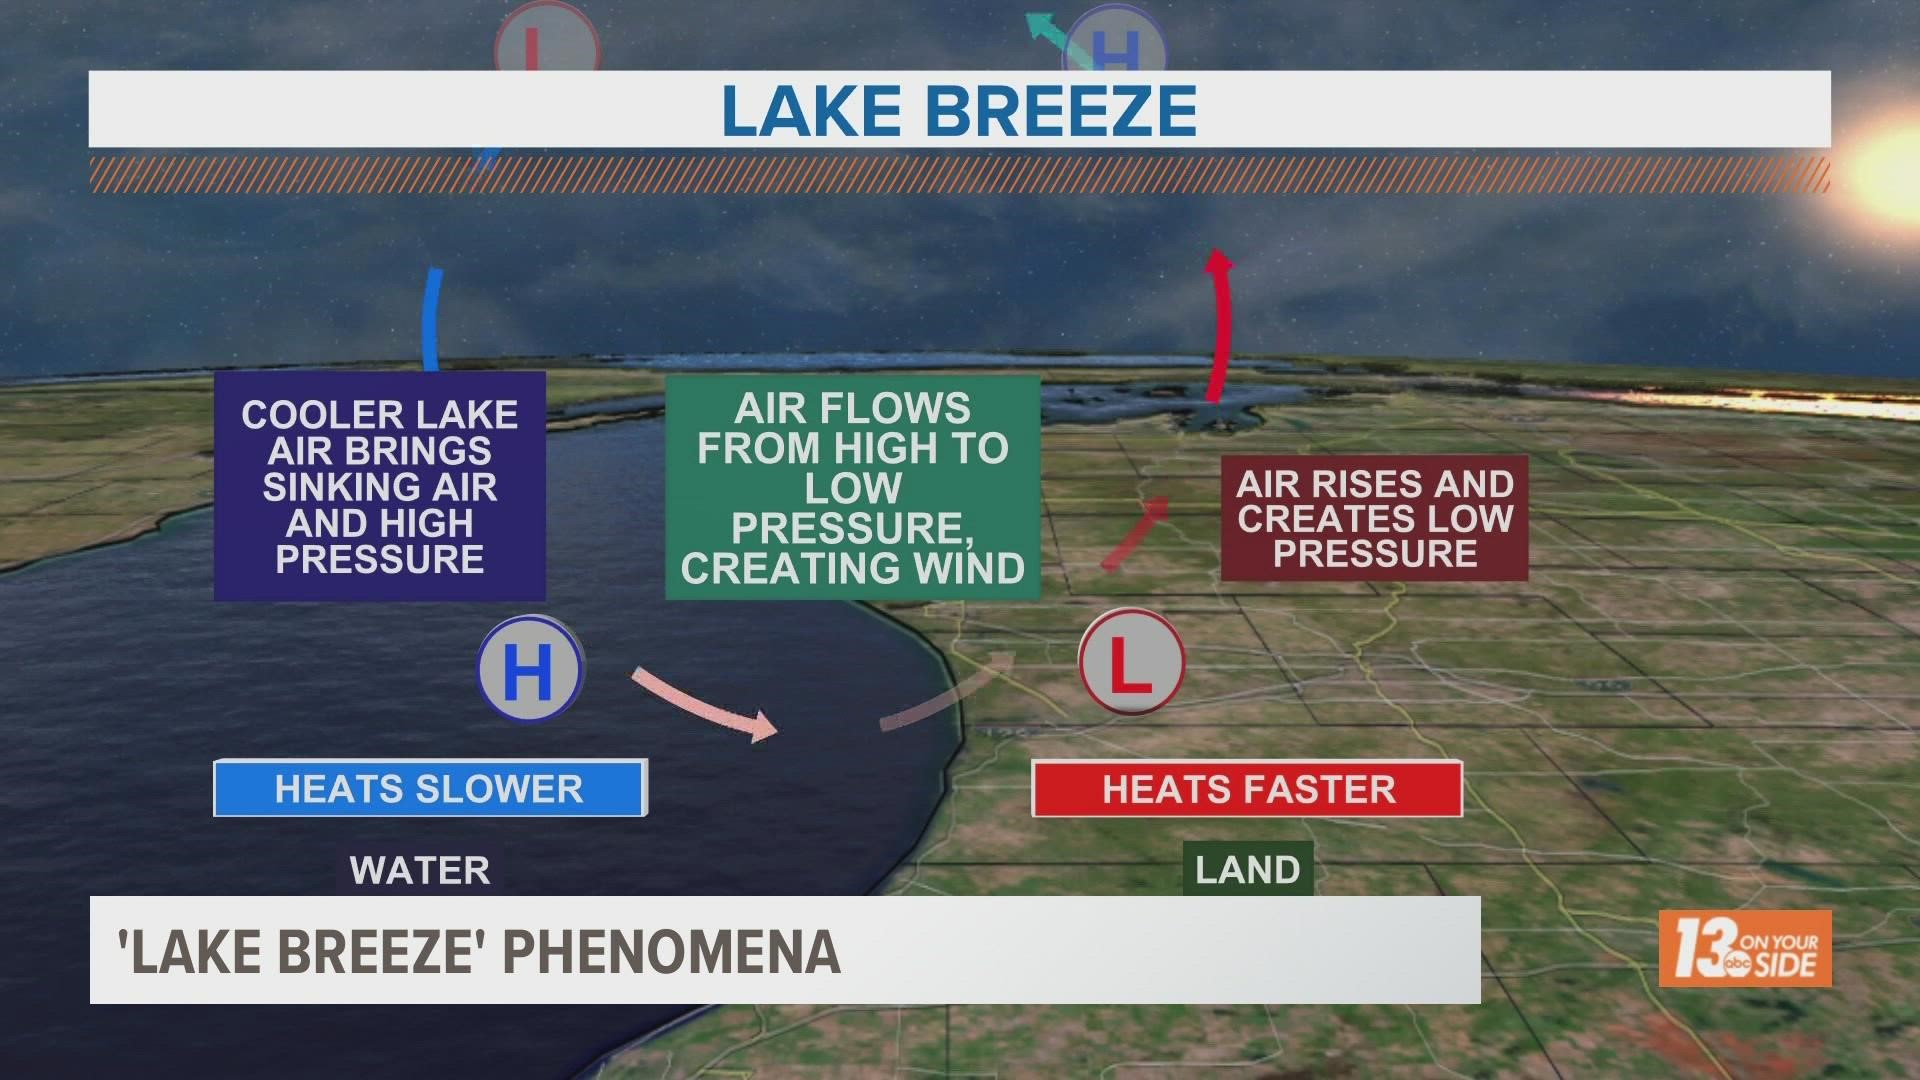 Lake breezes can cause temperatures to drop quickly within a matter of minutes. We spoke with an expert to break down why.